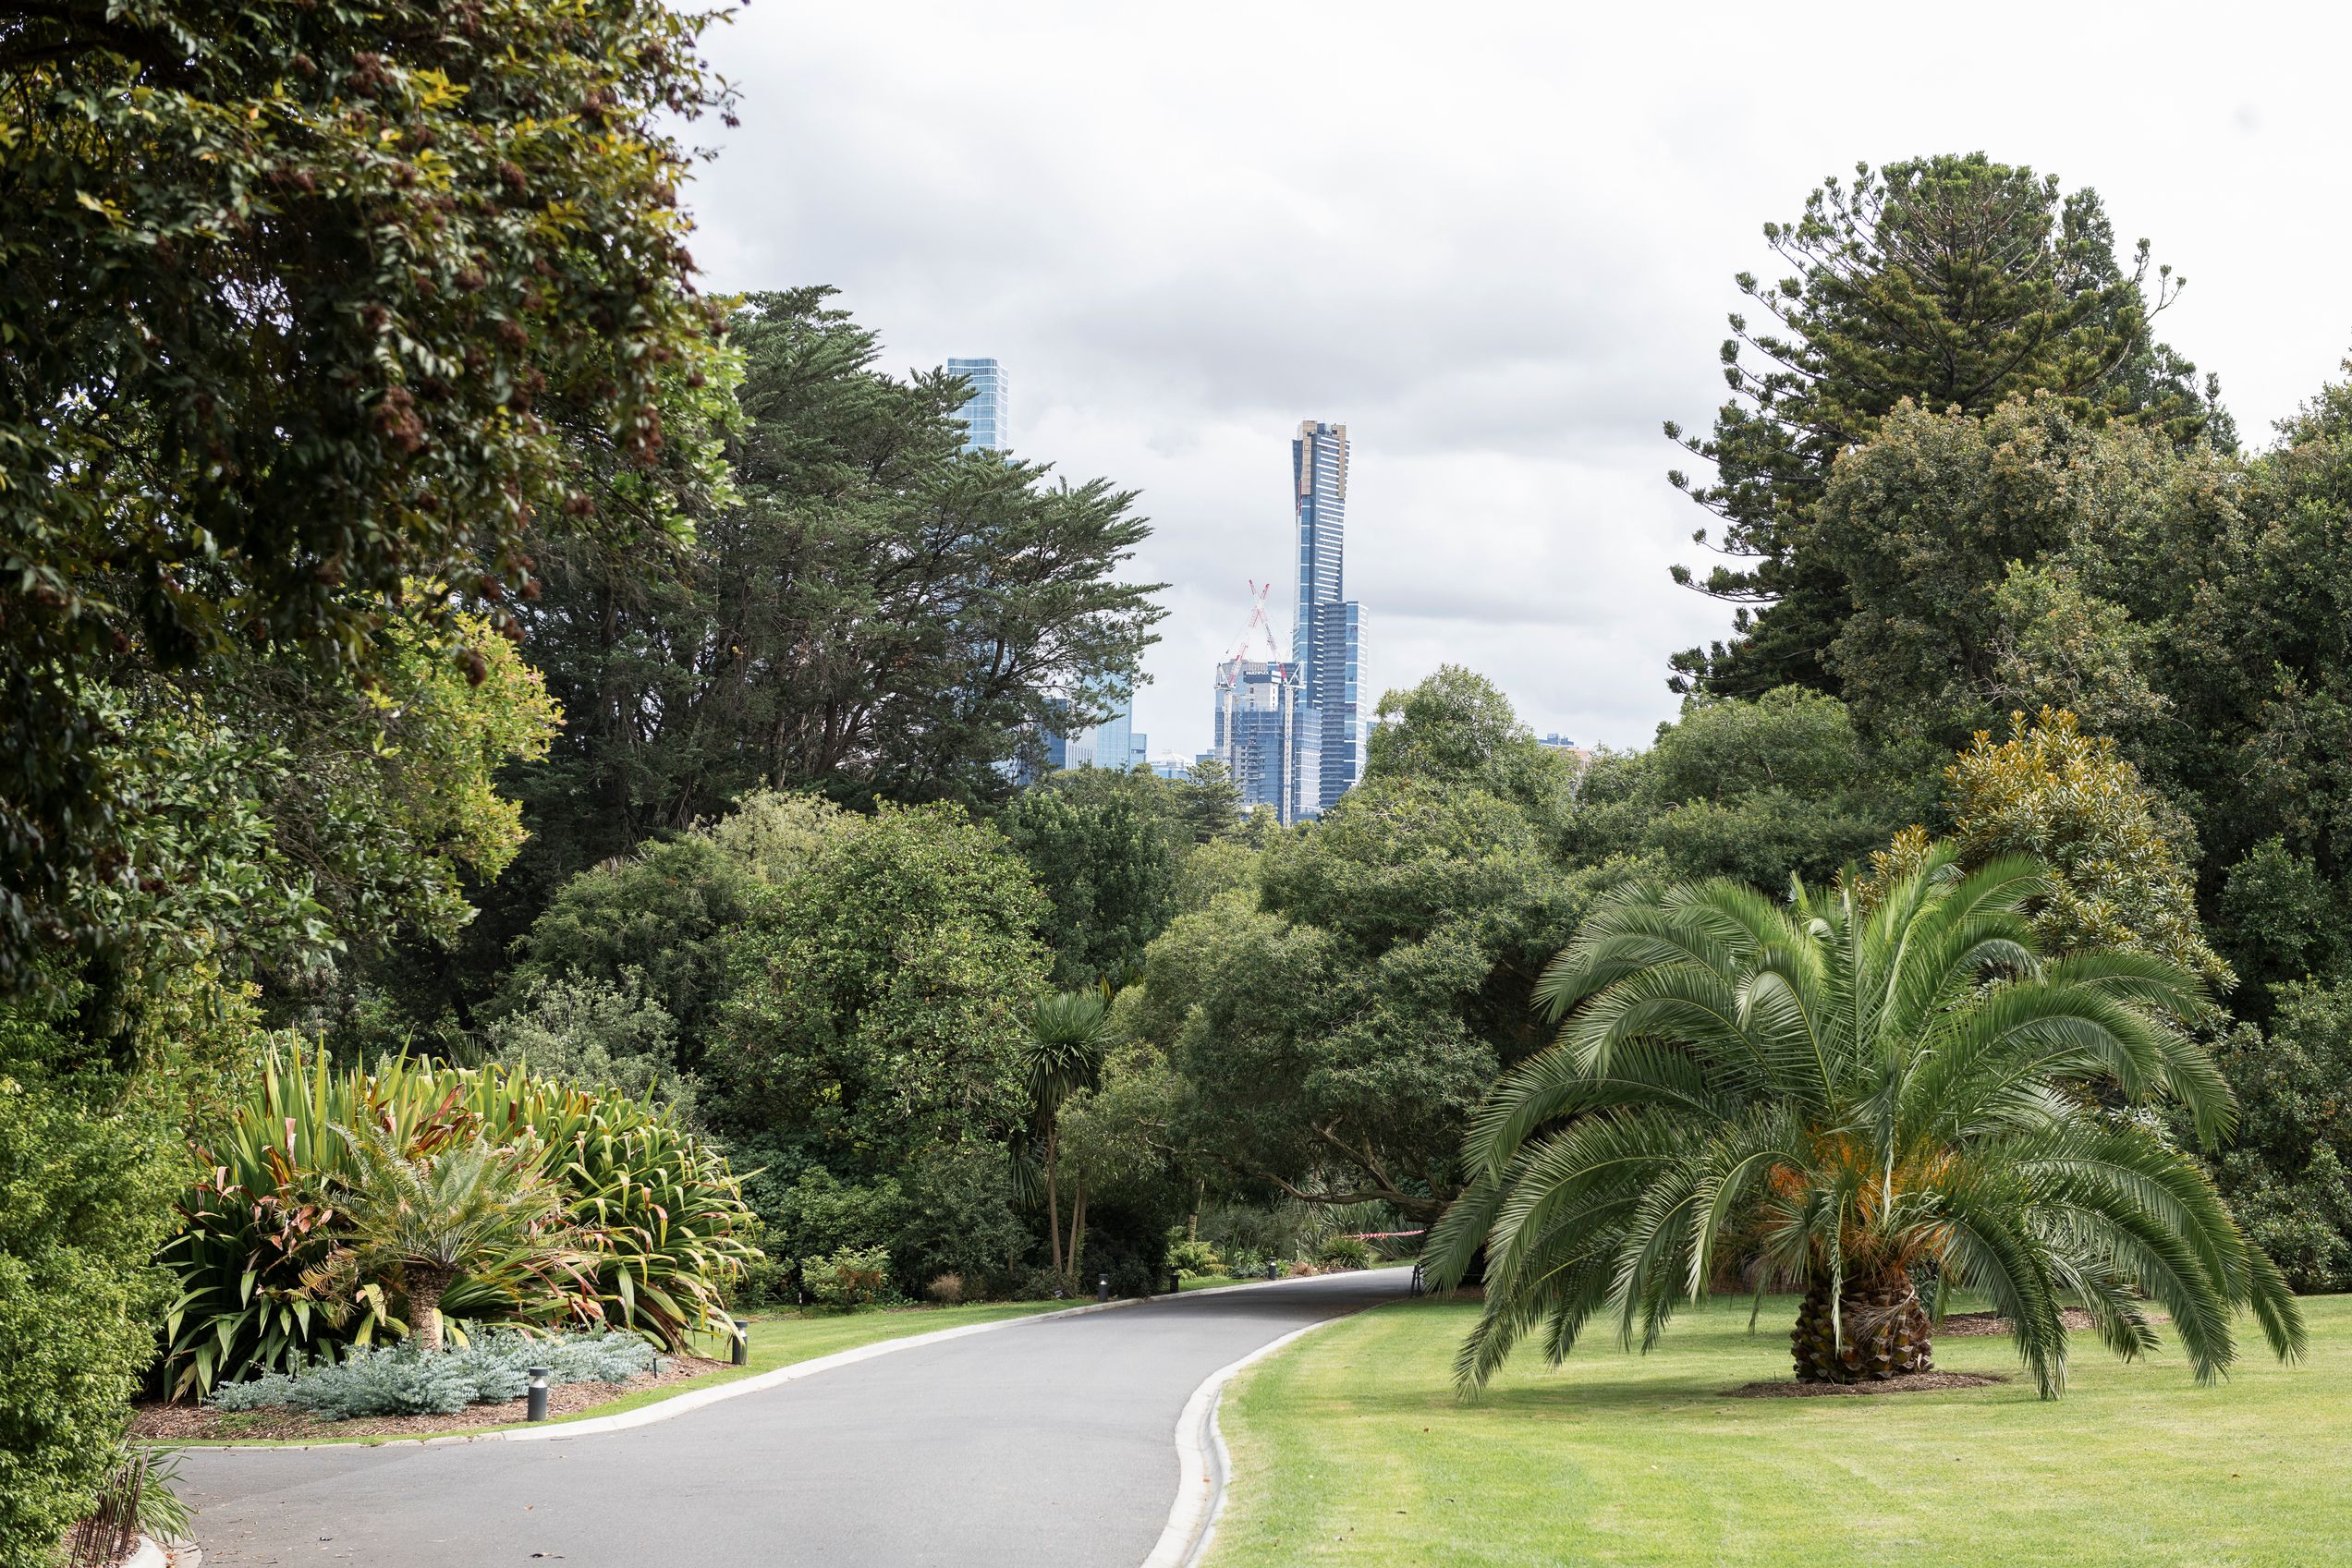 Bookended by the Royal Botanic Gardens and Fawkner Park, in what is arguably Melbourne's finest location. 